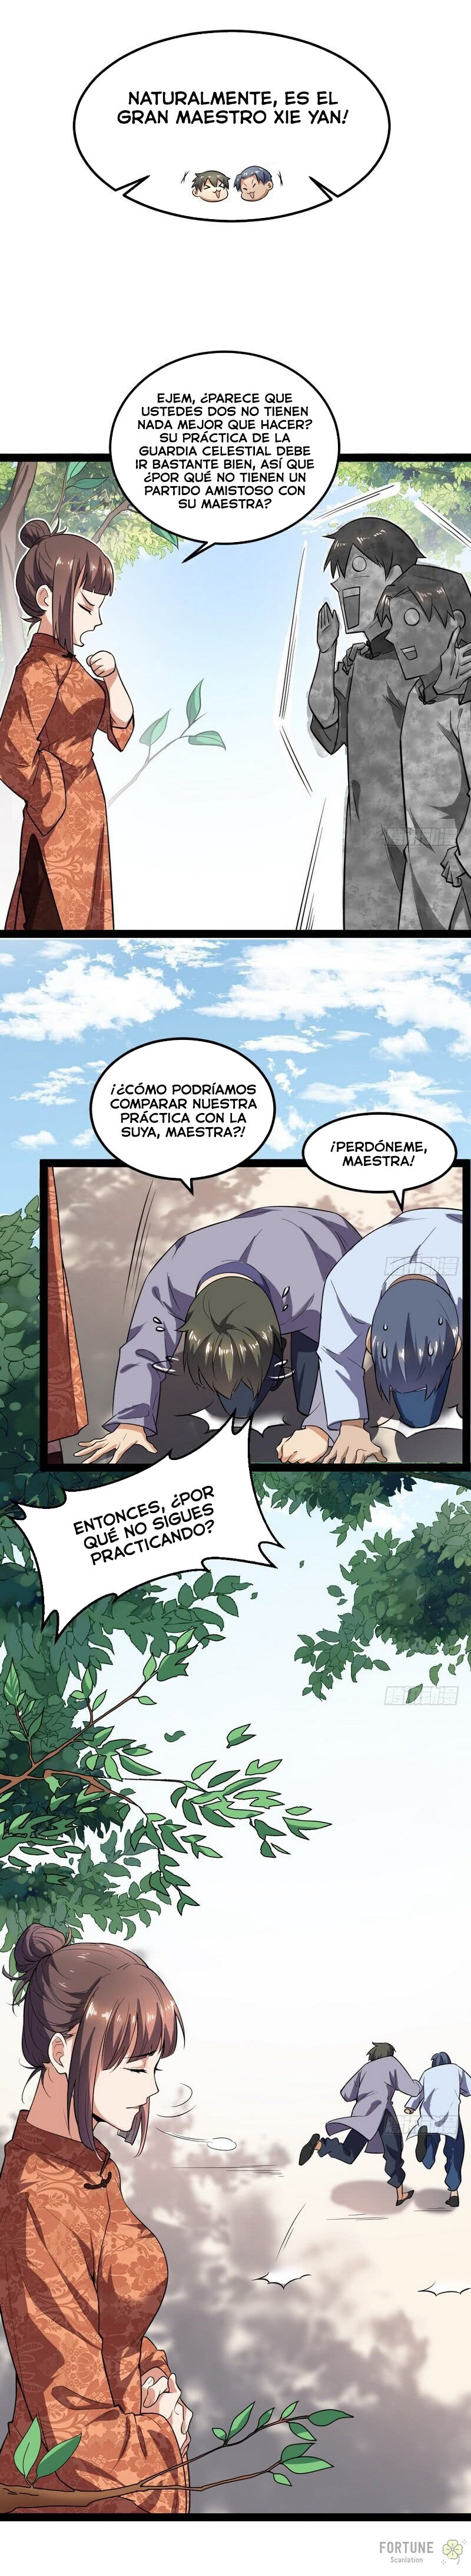 Manga Soy un dios maligno Chapter 23 image number 1